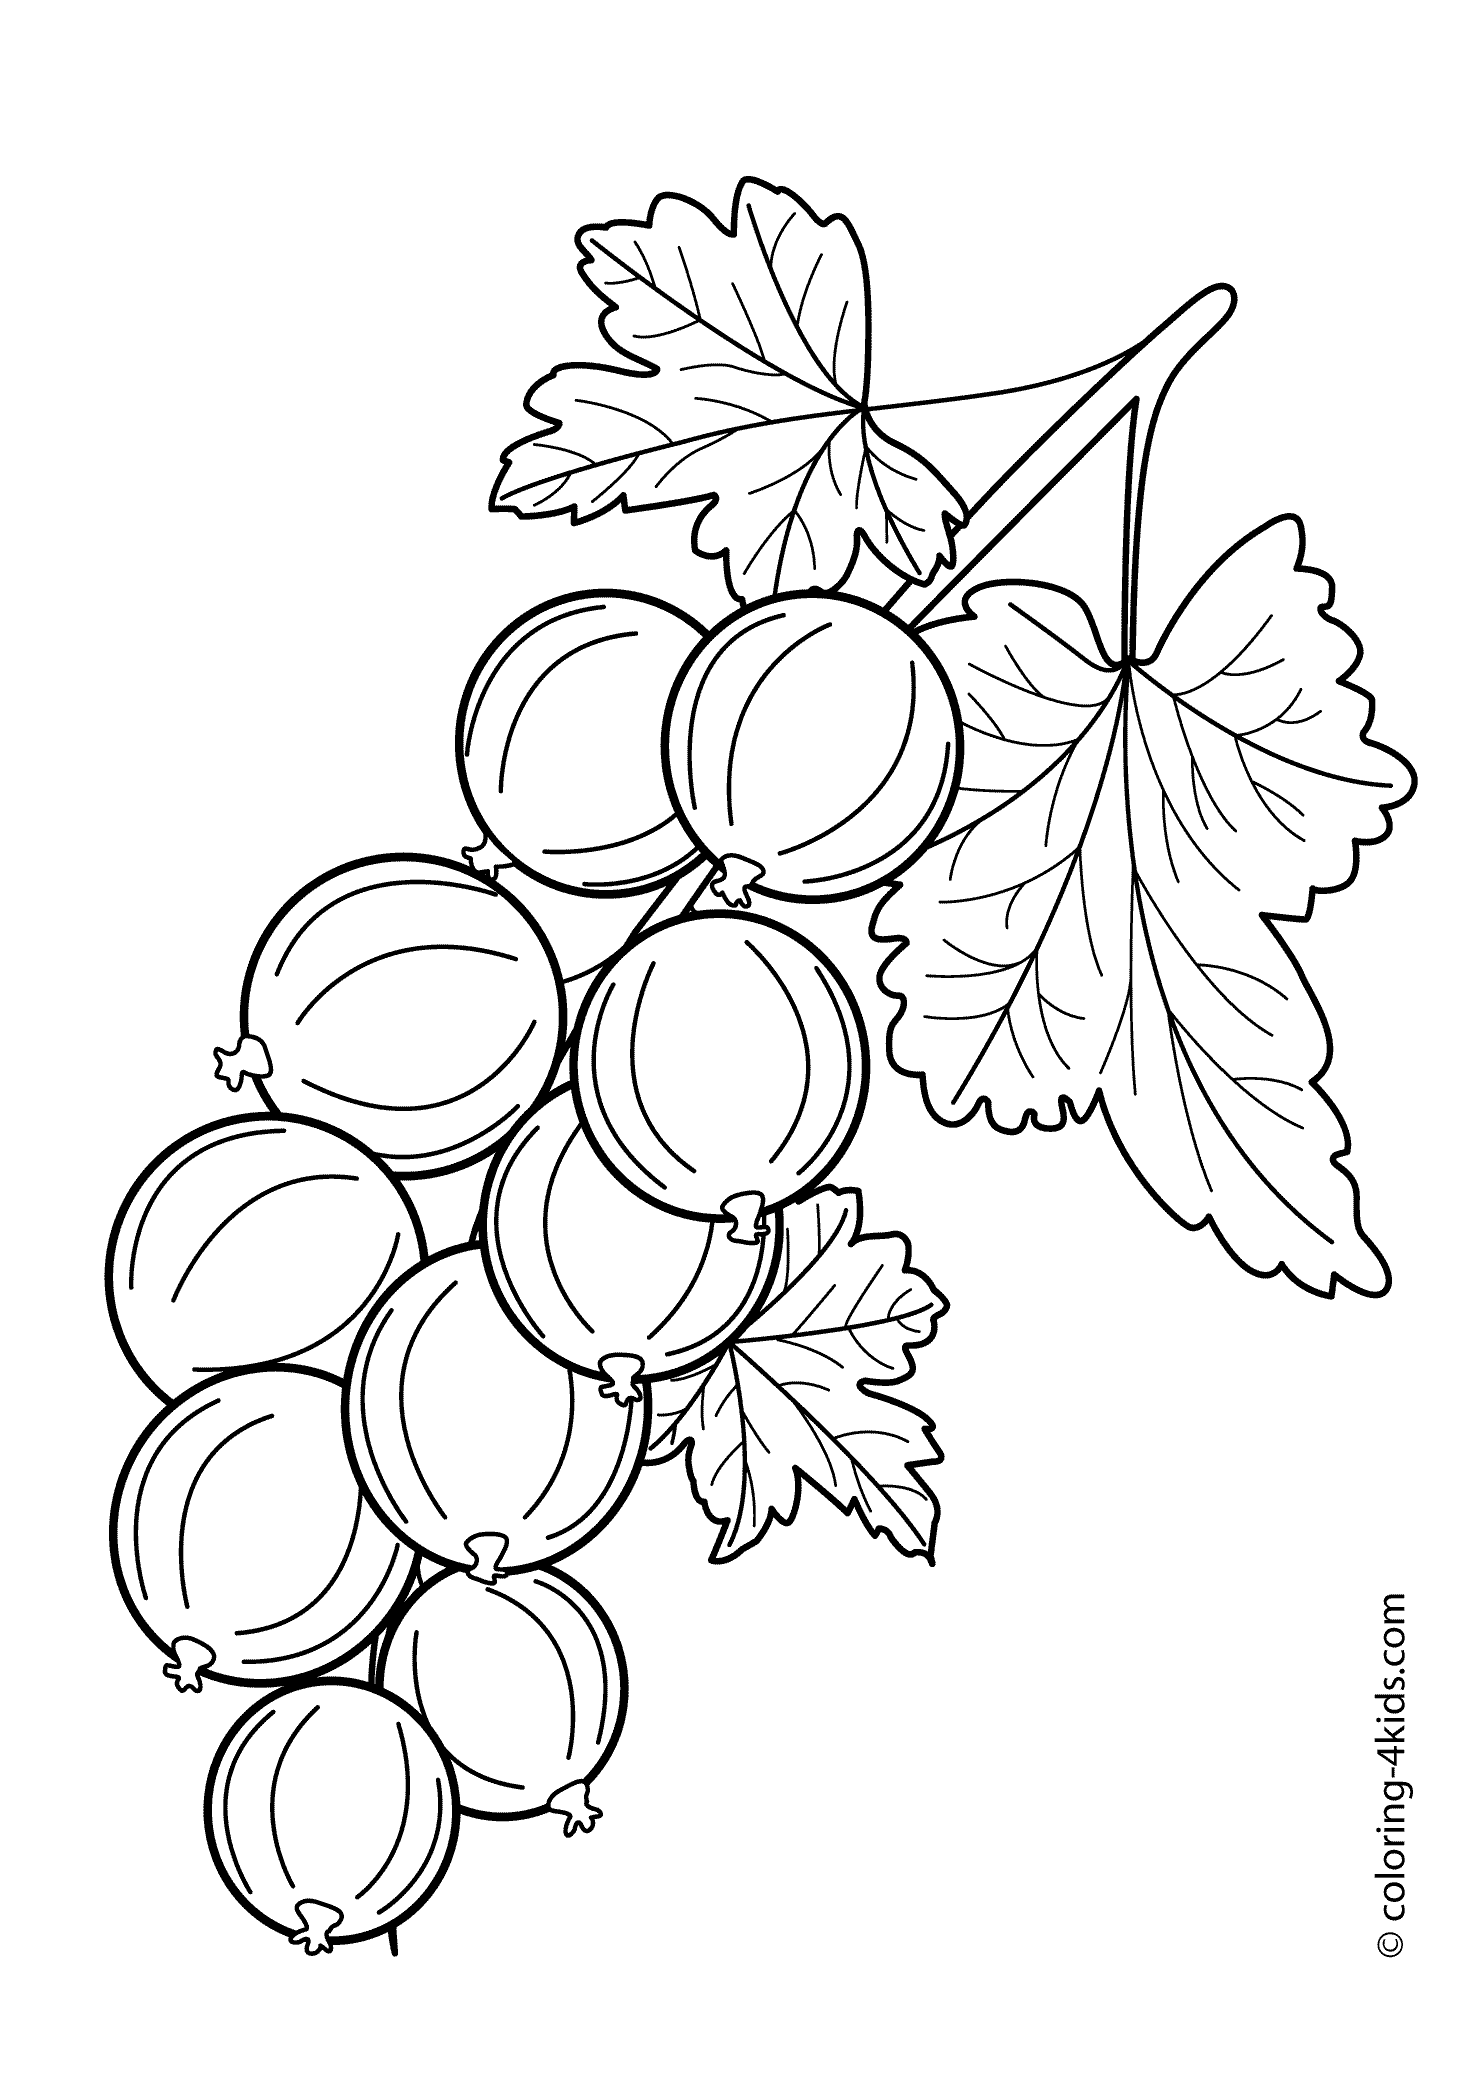 Currants coloring #12, Download drawings